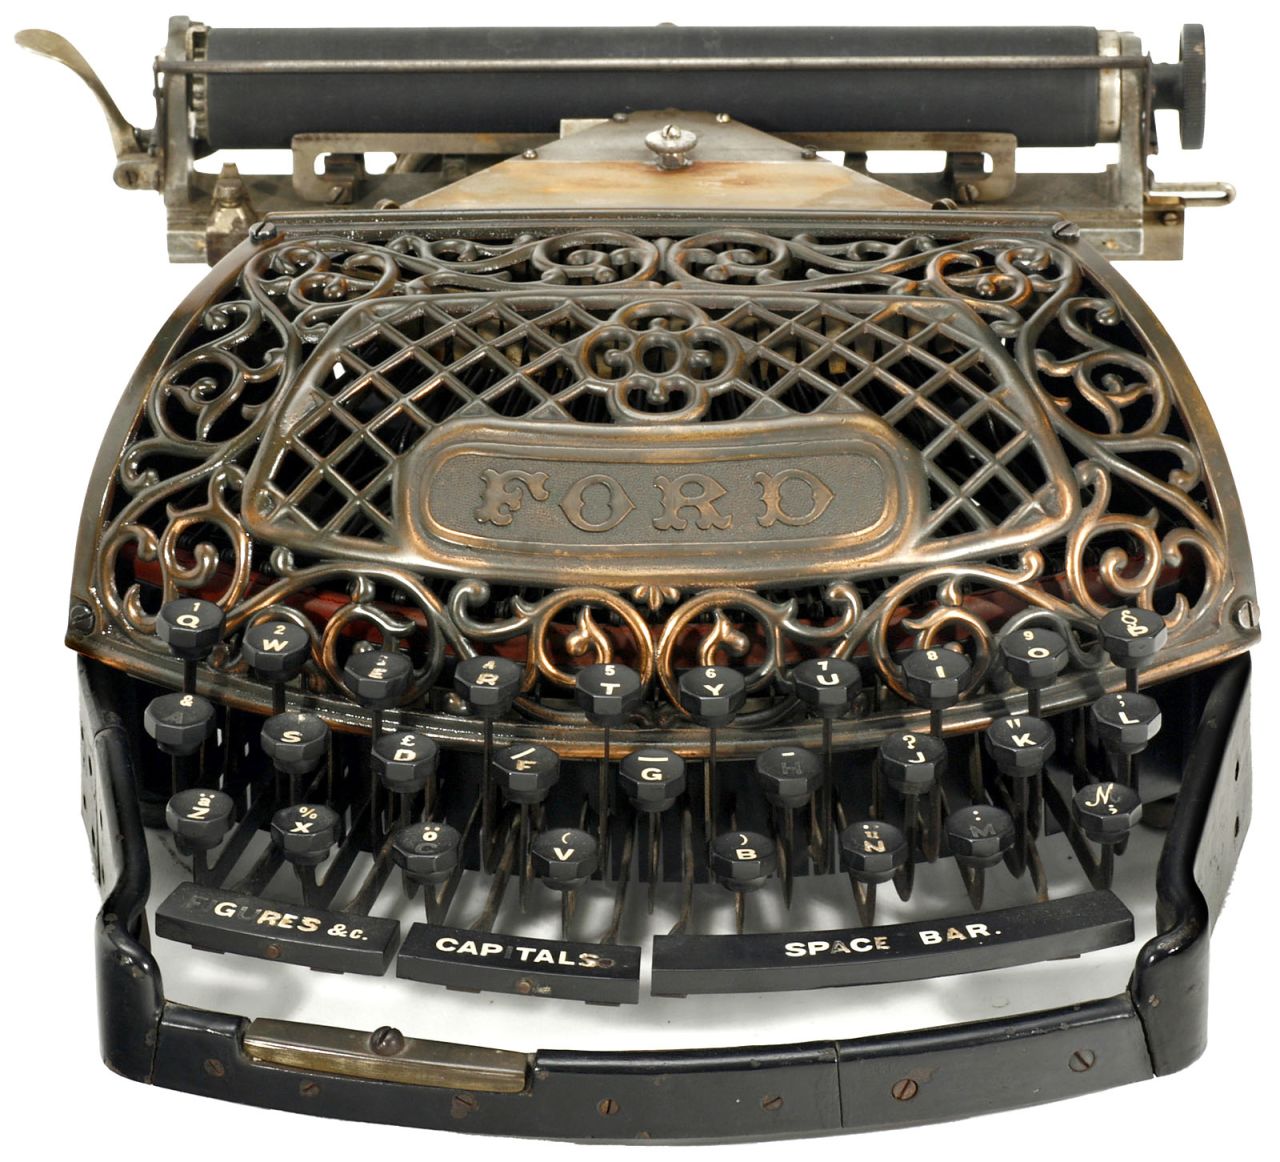 An 1895 Ford typewriter with filigree copper grille. The invention of typewriters in the mid 19th century changed the face of professional writing. The QWERTY keyboard is still the most common modern-day keyboard layout.